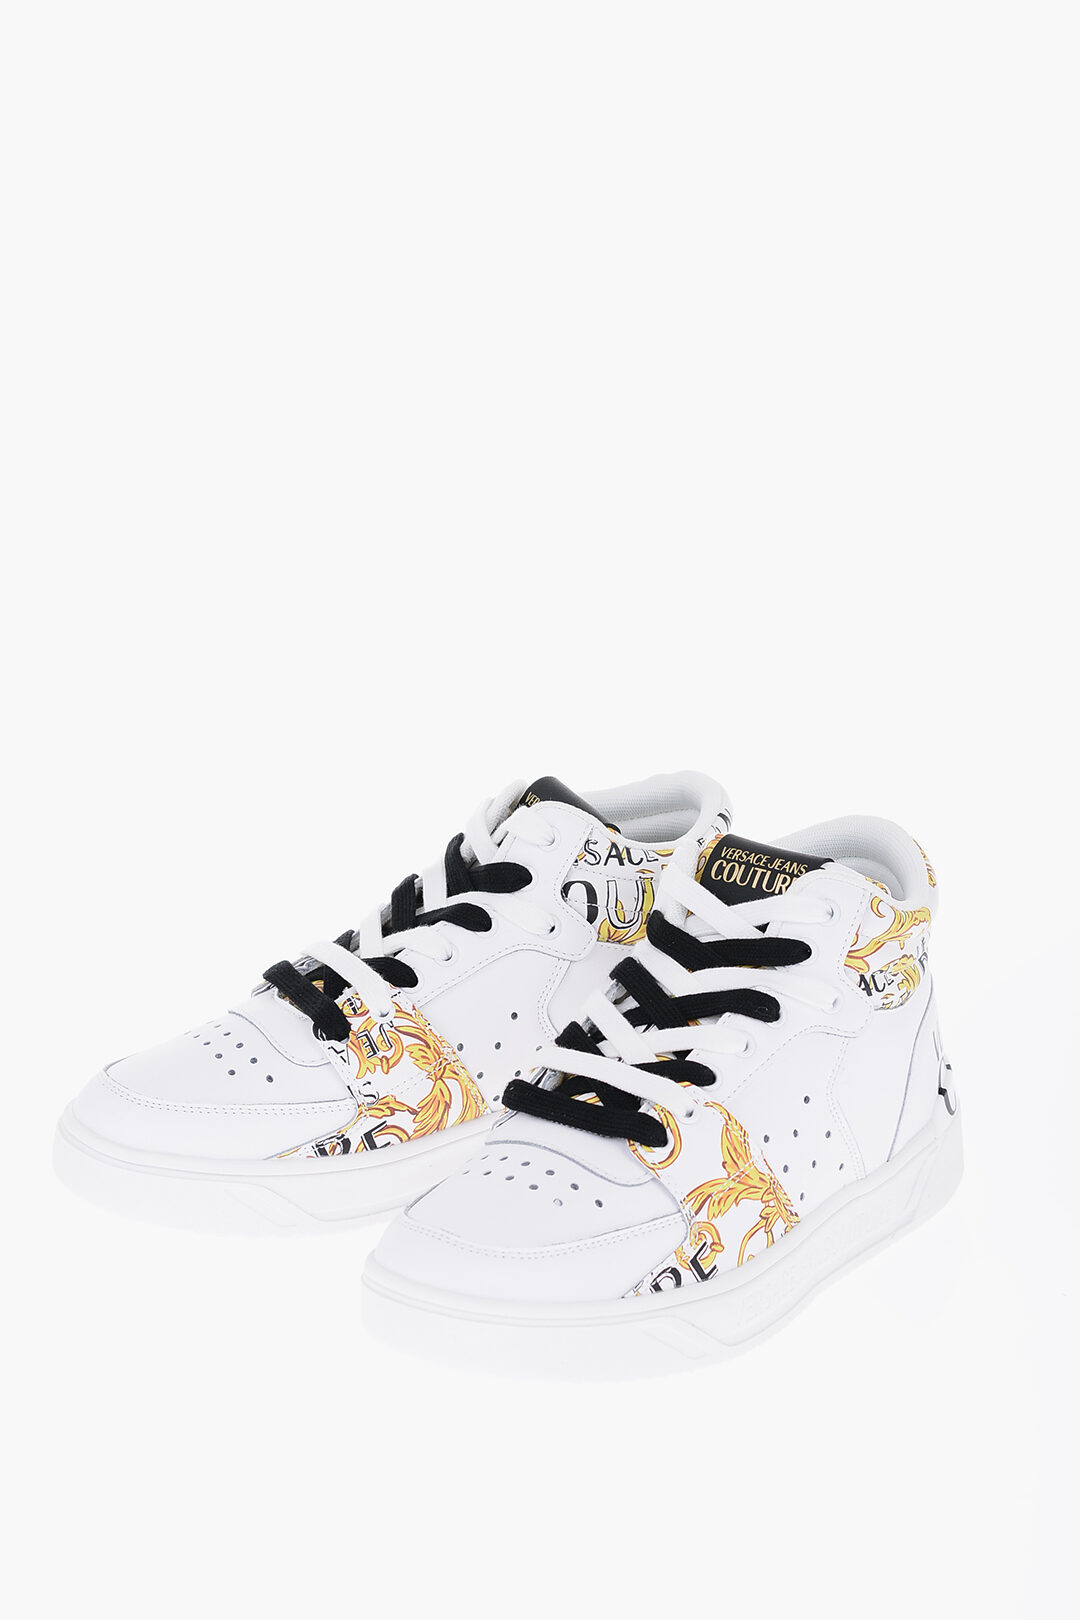 Versace JEANS COUTURE Baroque Printed Leather STARLIGHT High-Top